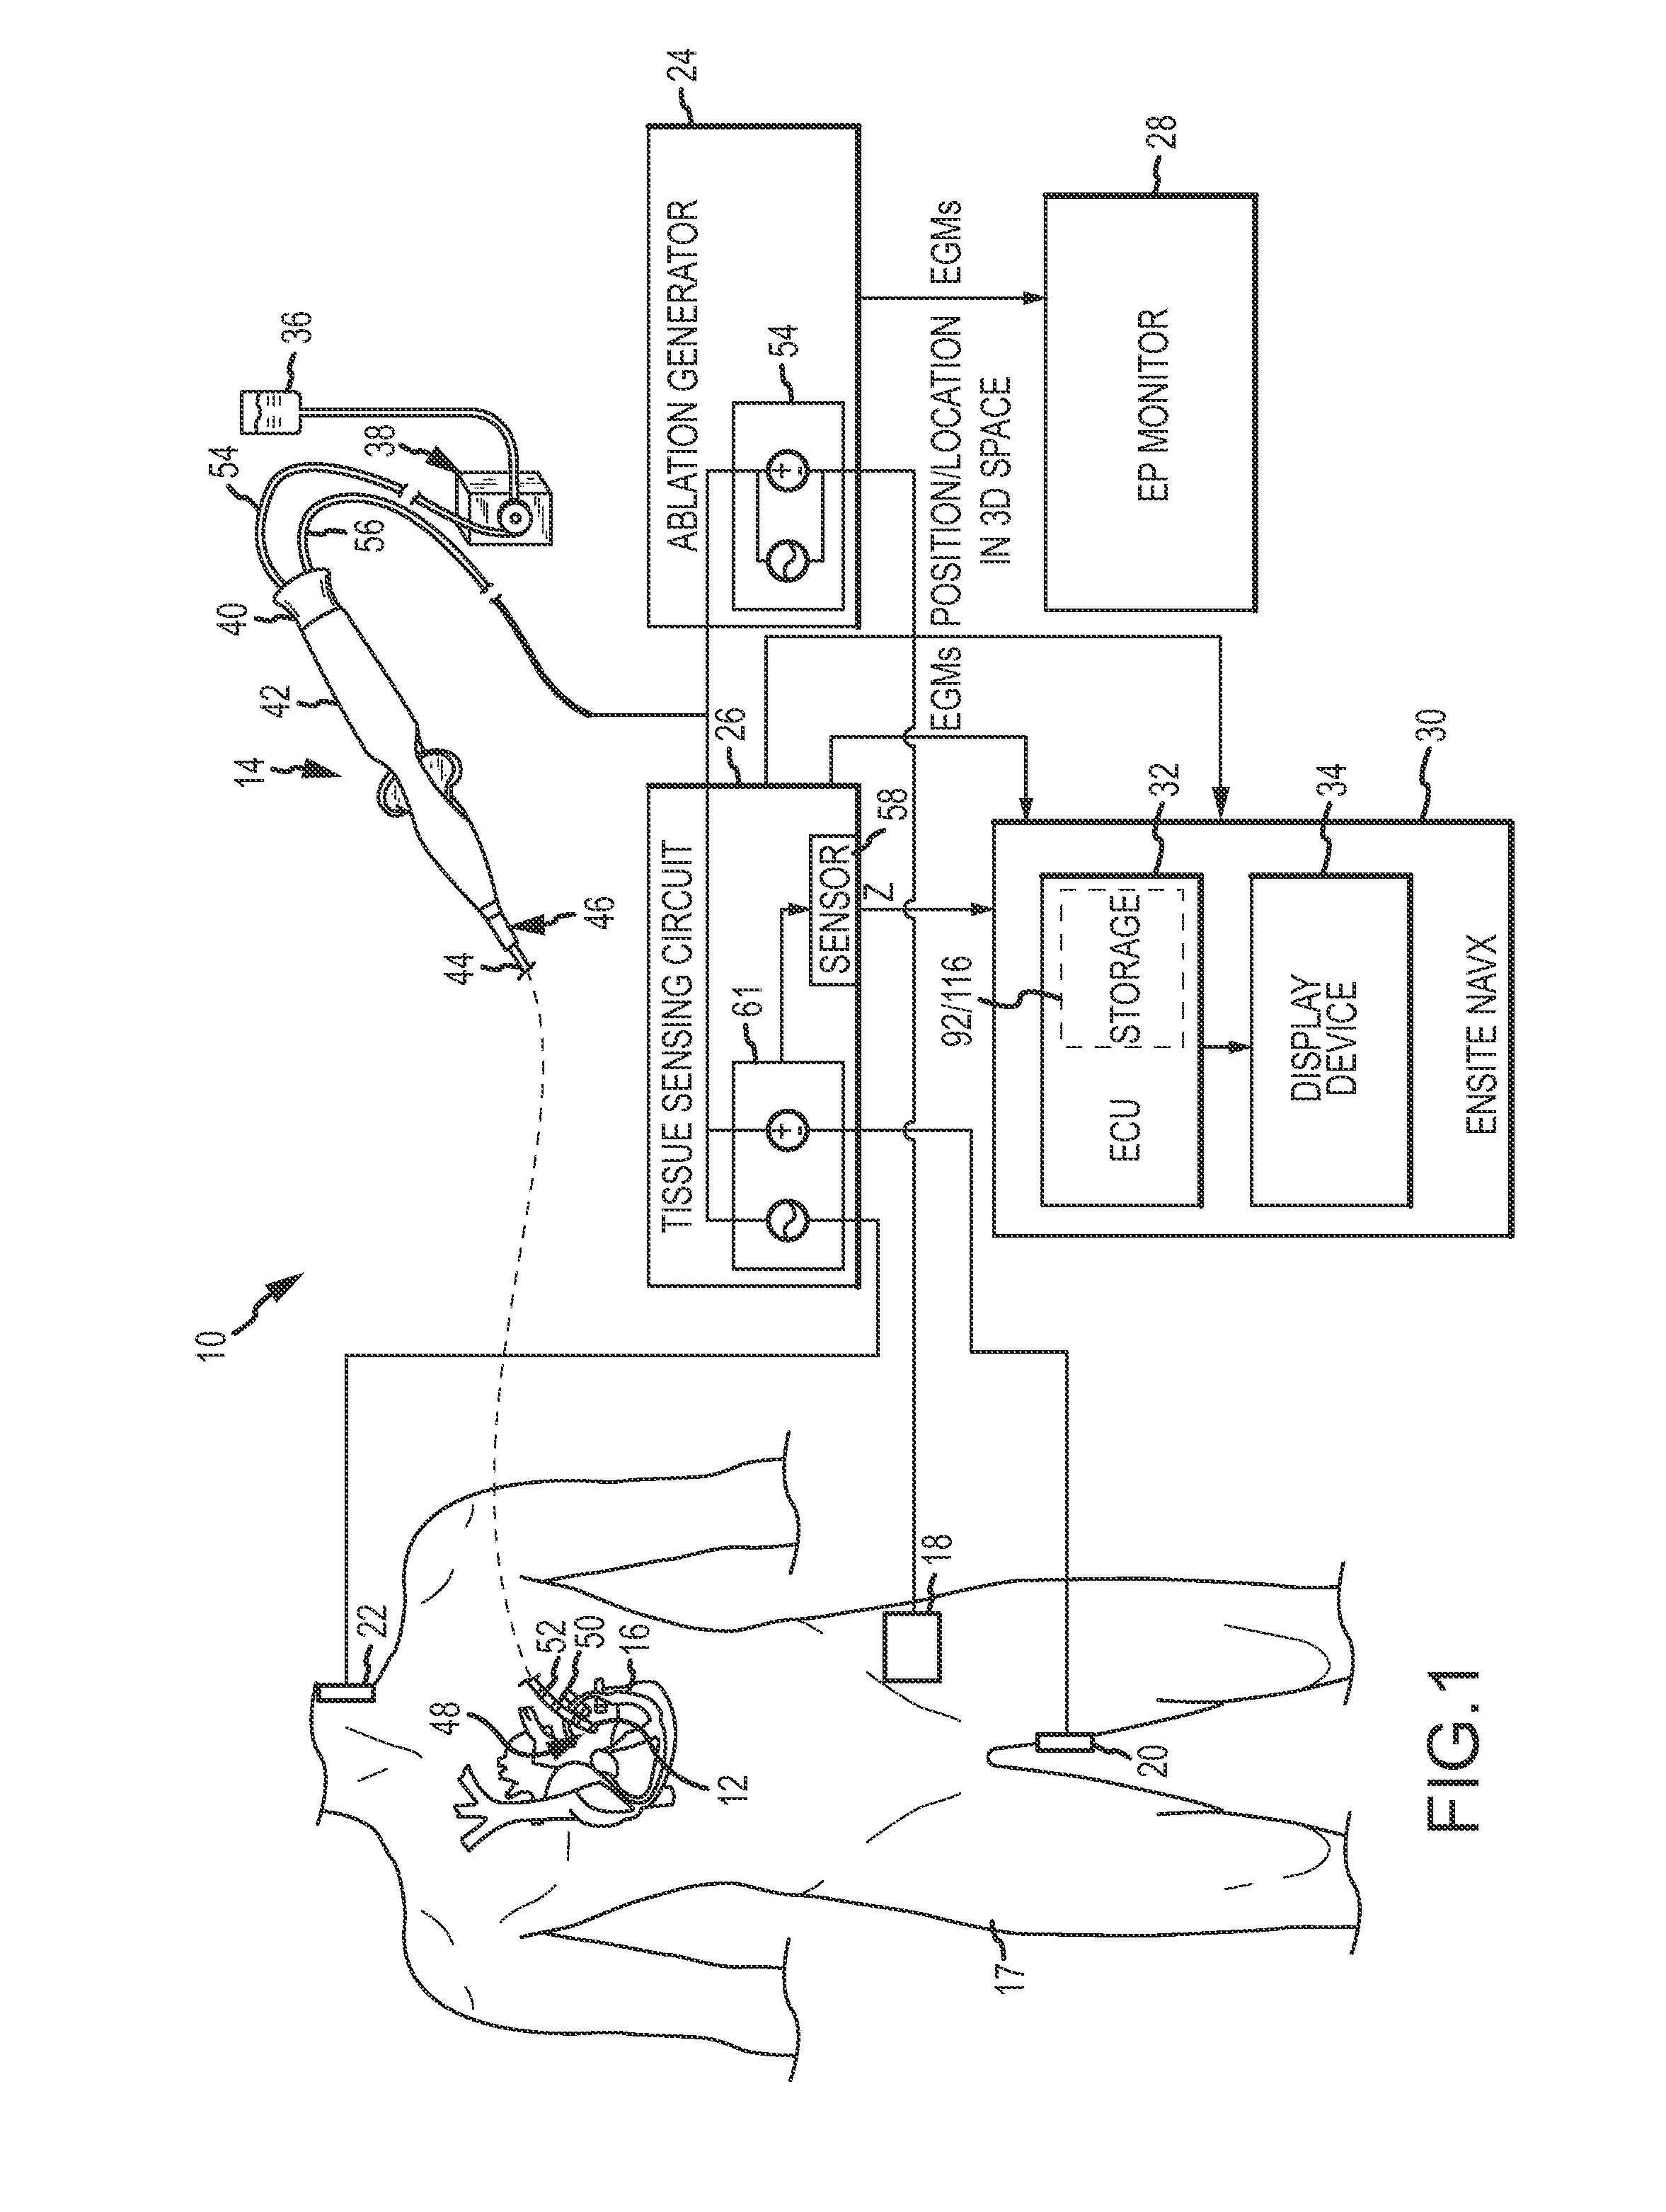 System and method for assessing lesions in tissue